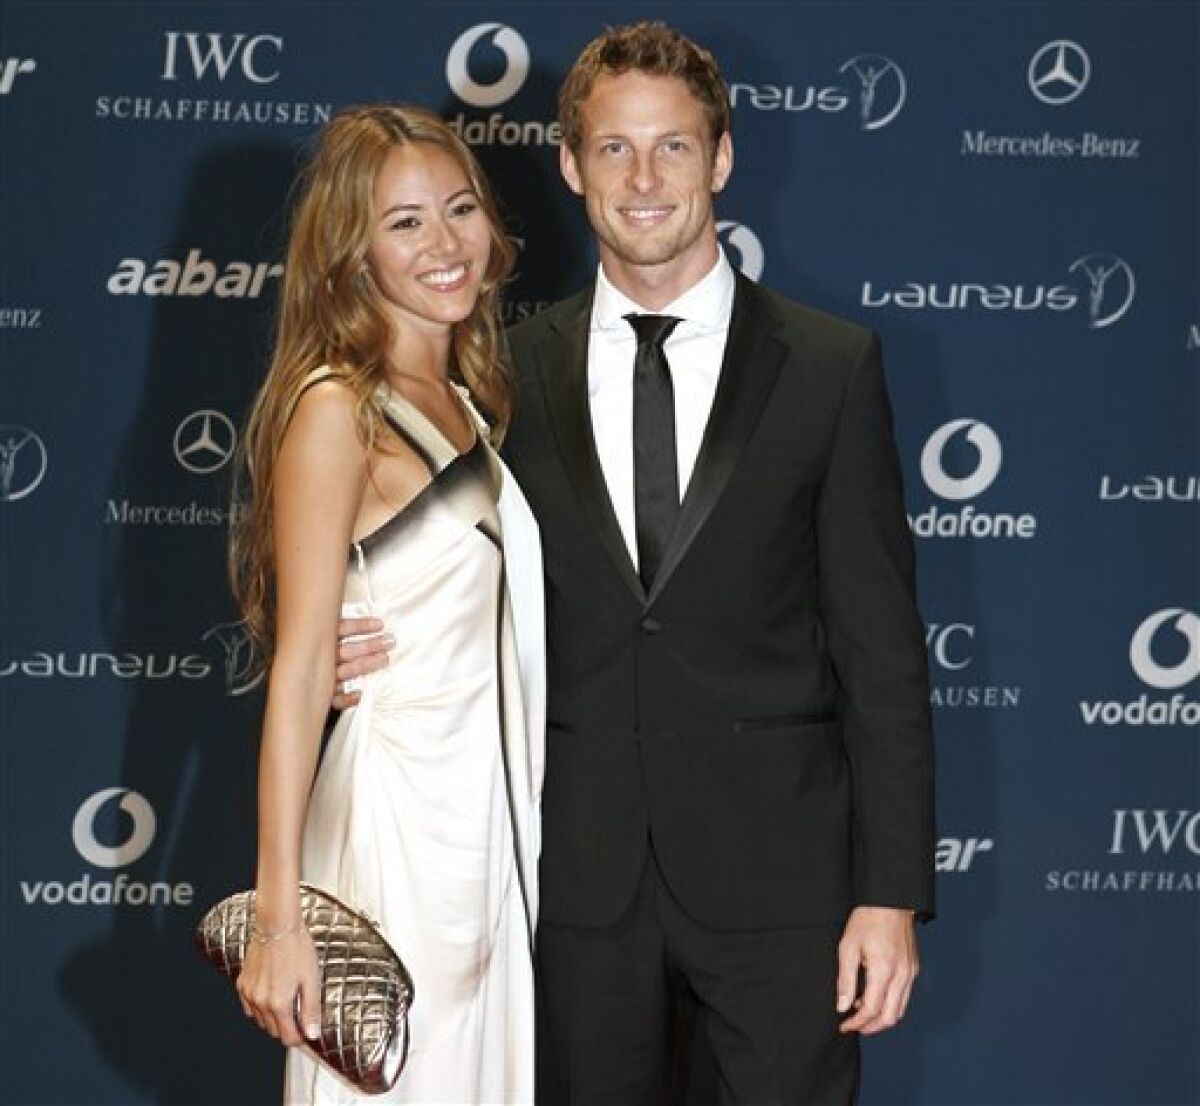 British F1 driver Jenson Button with his companion arrives for the Laureus Awards in Abu Dhabi, United Arab Emirates, Wednesday March 10, 2010. (AP Photo/Farhad Berahman)